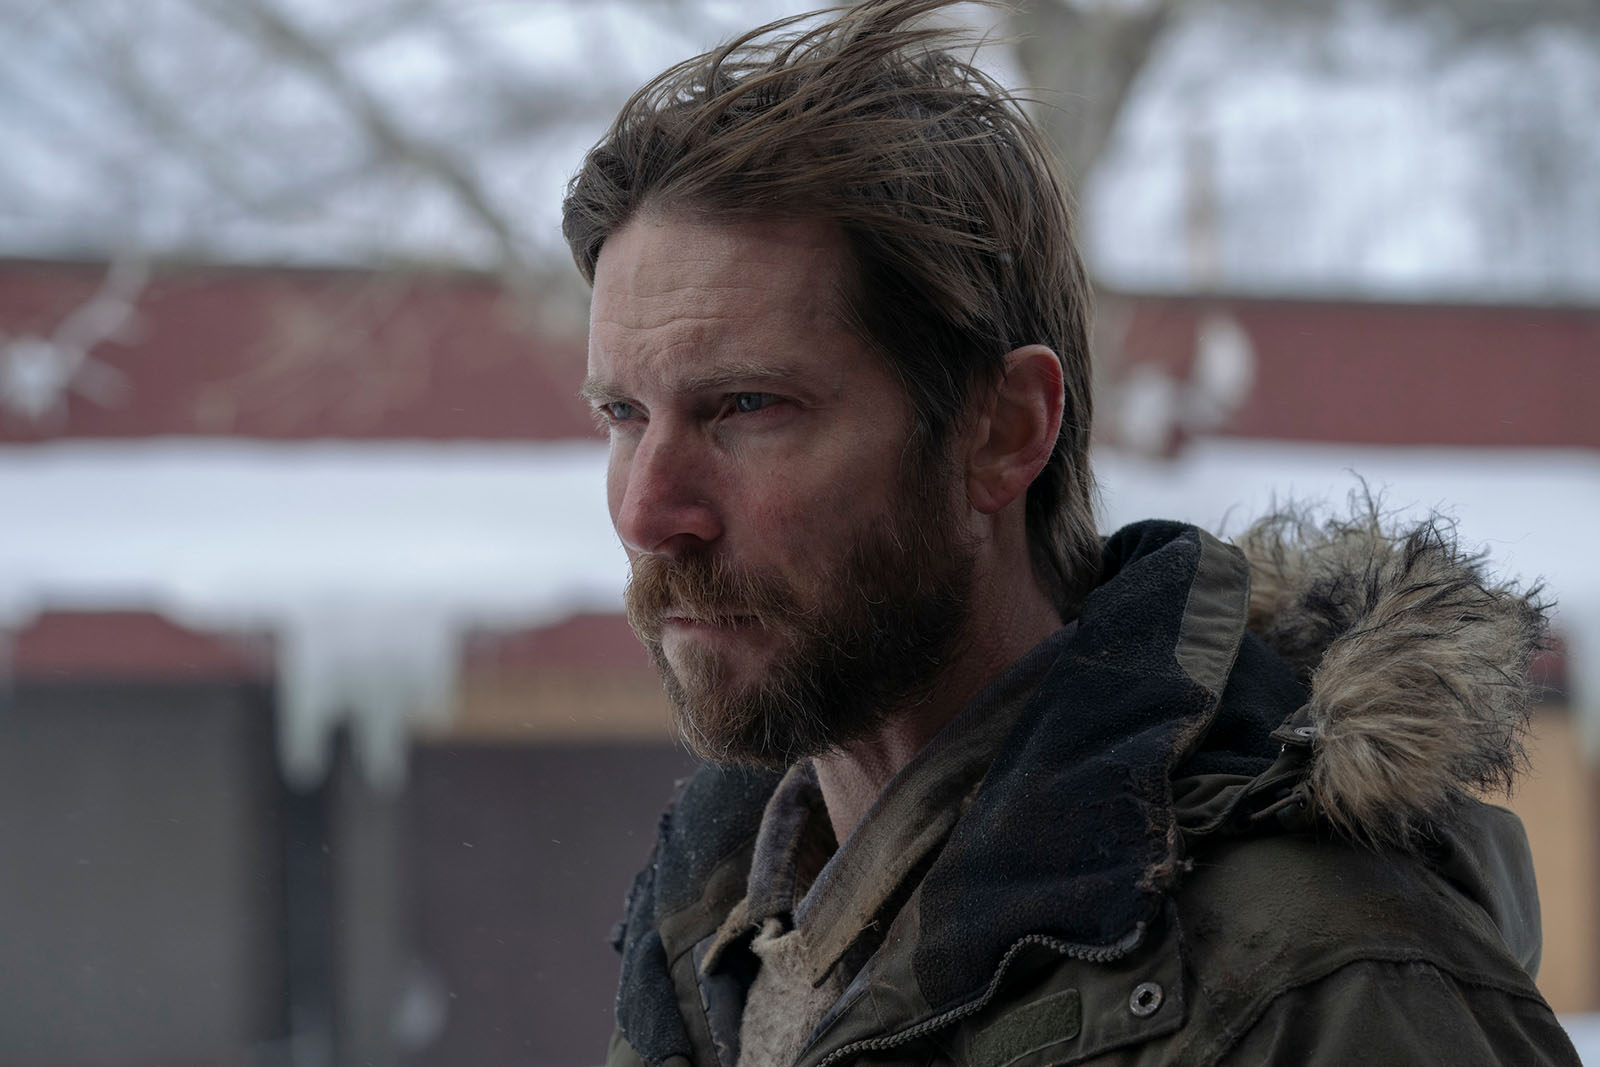 Troy Baker voices Joel in The Last of Us games. He also appears in the show as cannibal cult member James. Image © HBO